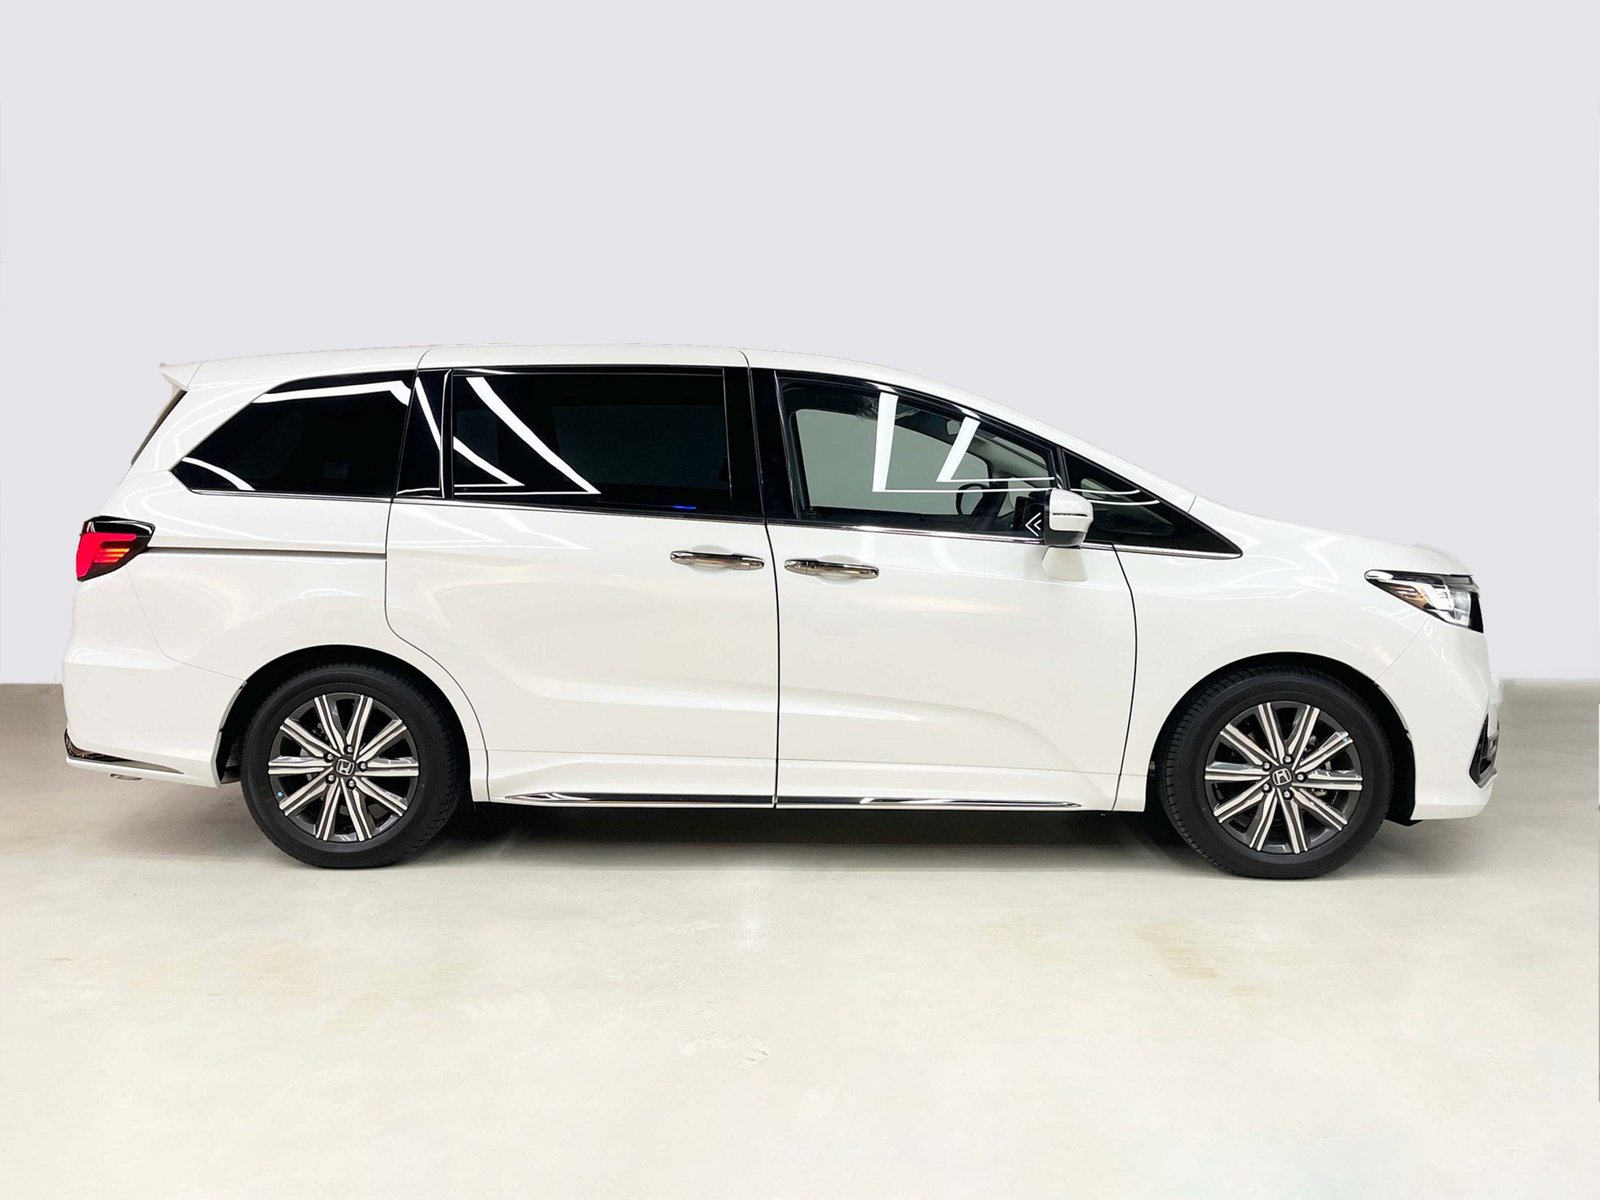 All-New Honda Odyssey | Price, Reviews, Pictures u0026 More